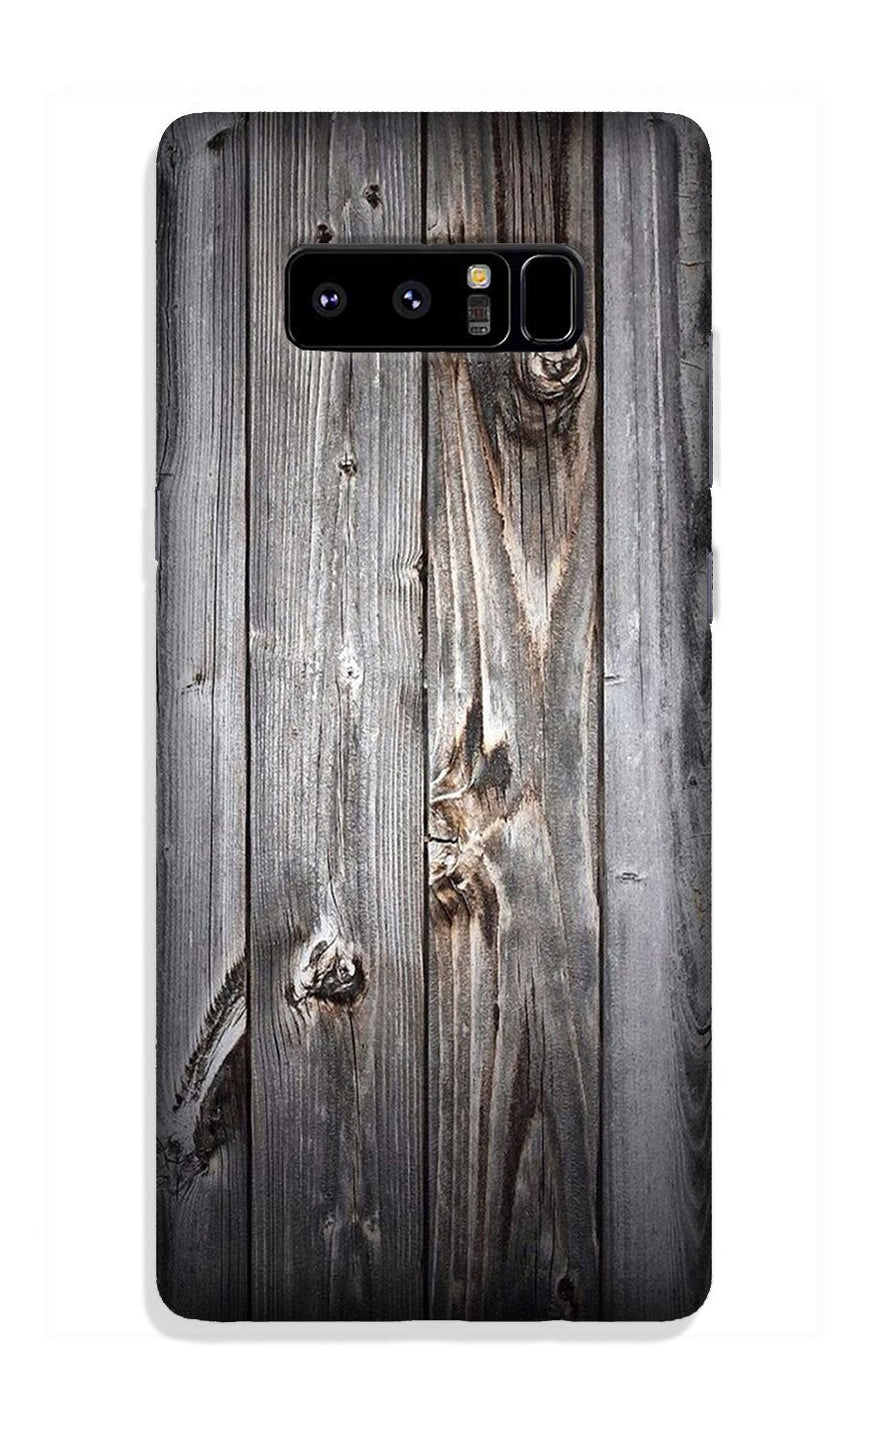 Wooden Look Case for Galaxy Note 8  (Design - 114)